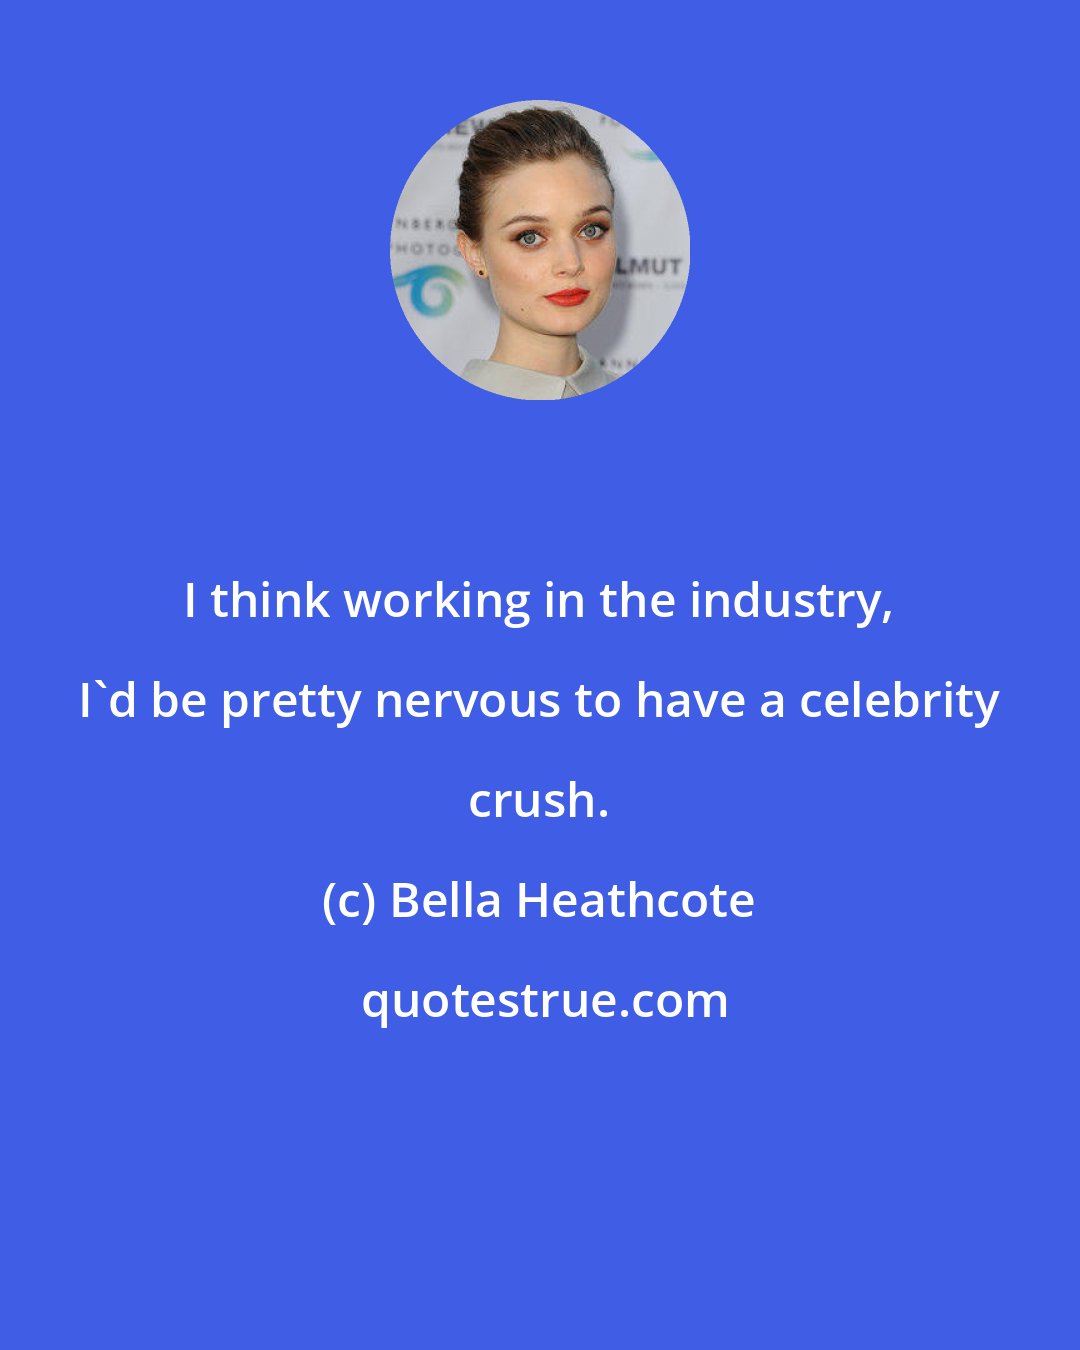 Bella Heathcote: I think working in the industry, I'd be pretty nervous to have a celebrity crush.